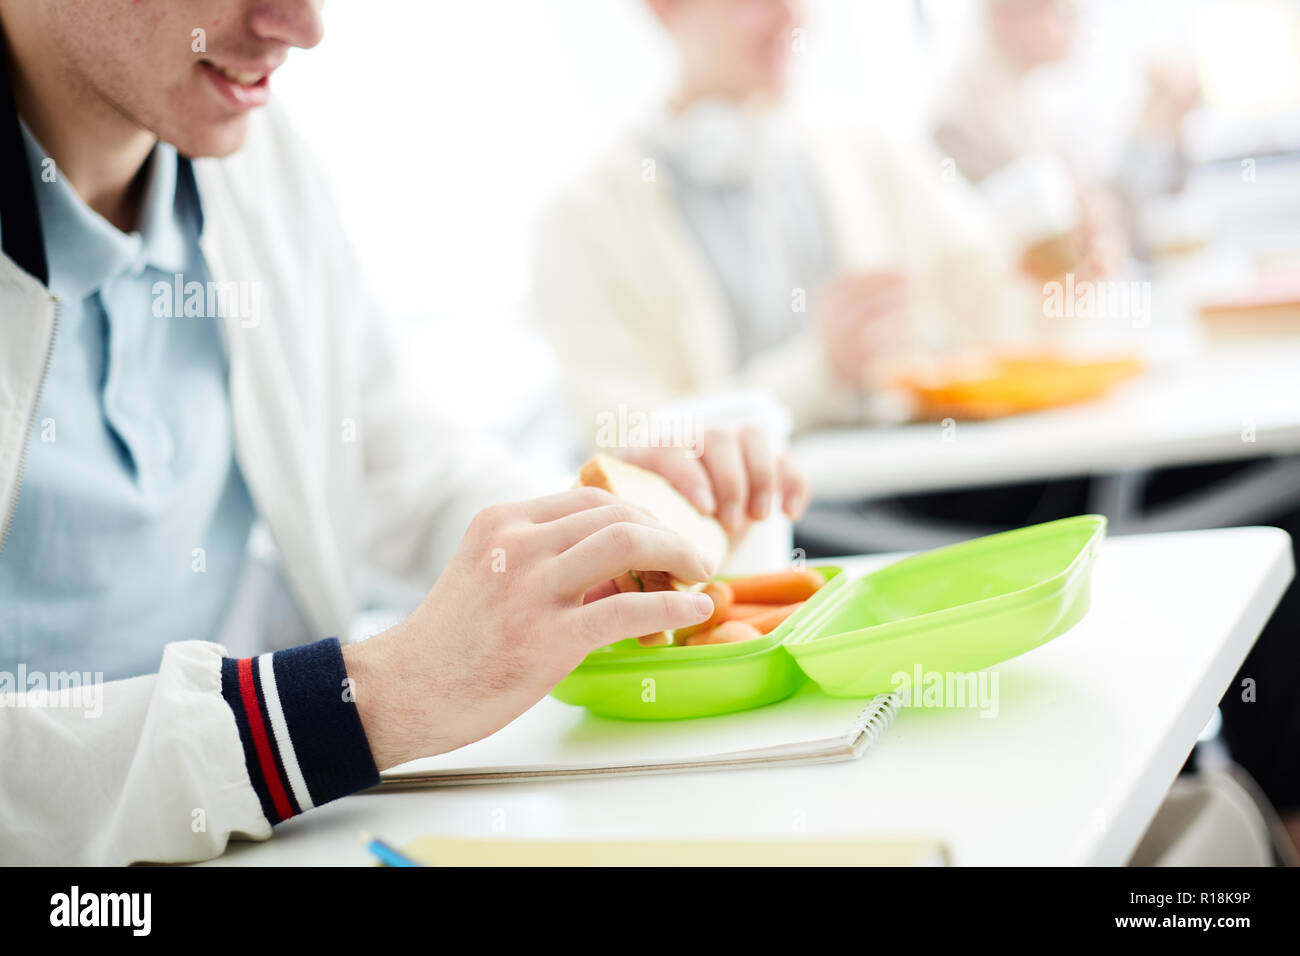 Contemporary student taking out sandwich from plastic container and going to eat it by desk Stock Photo